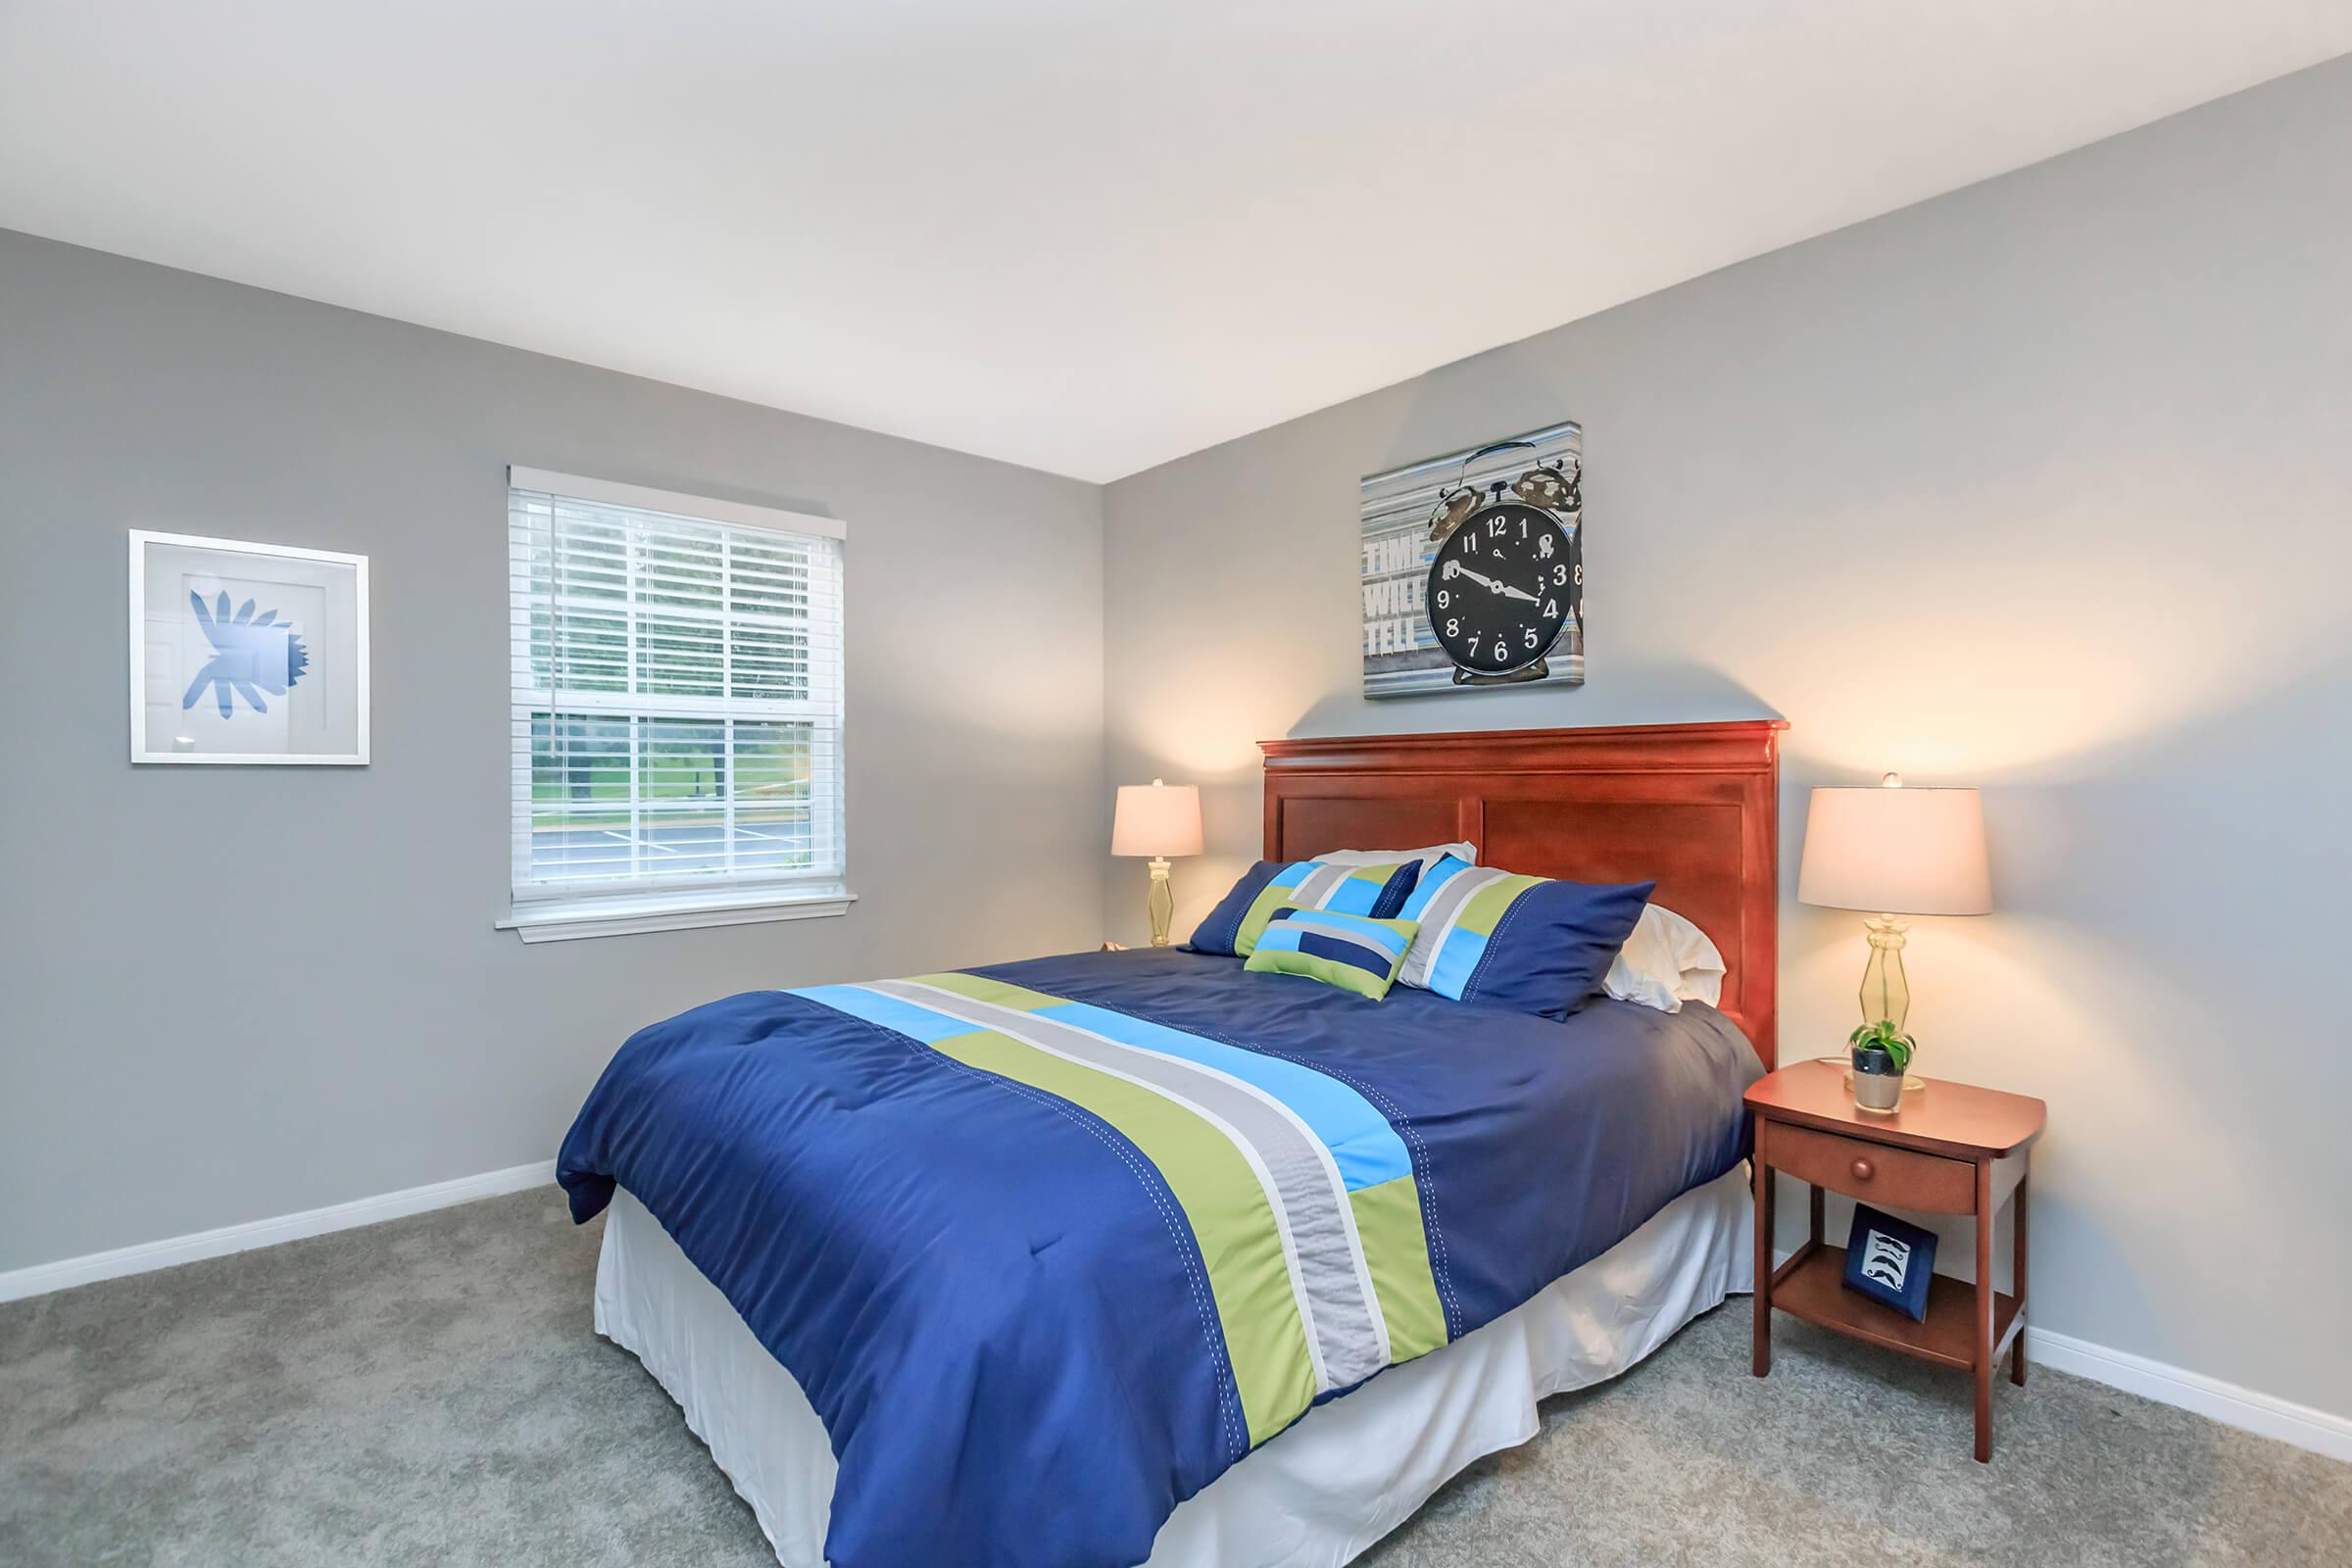 Make this bedroom your own at Graymere in Columbia, Tennessee